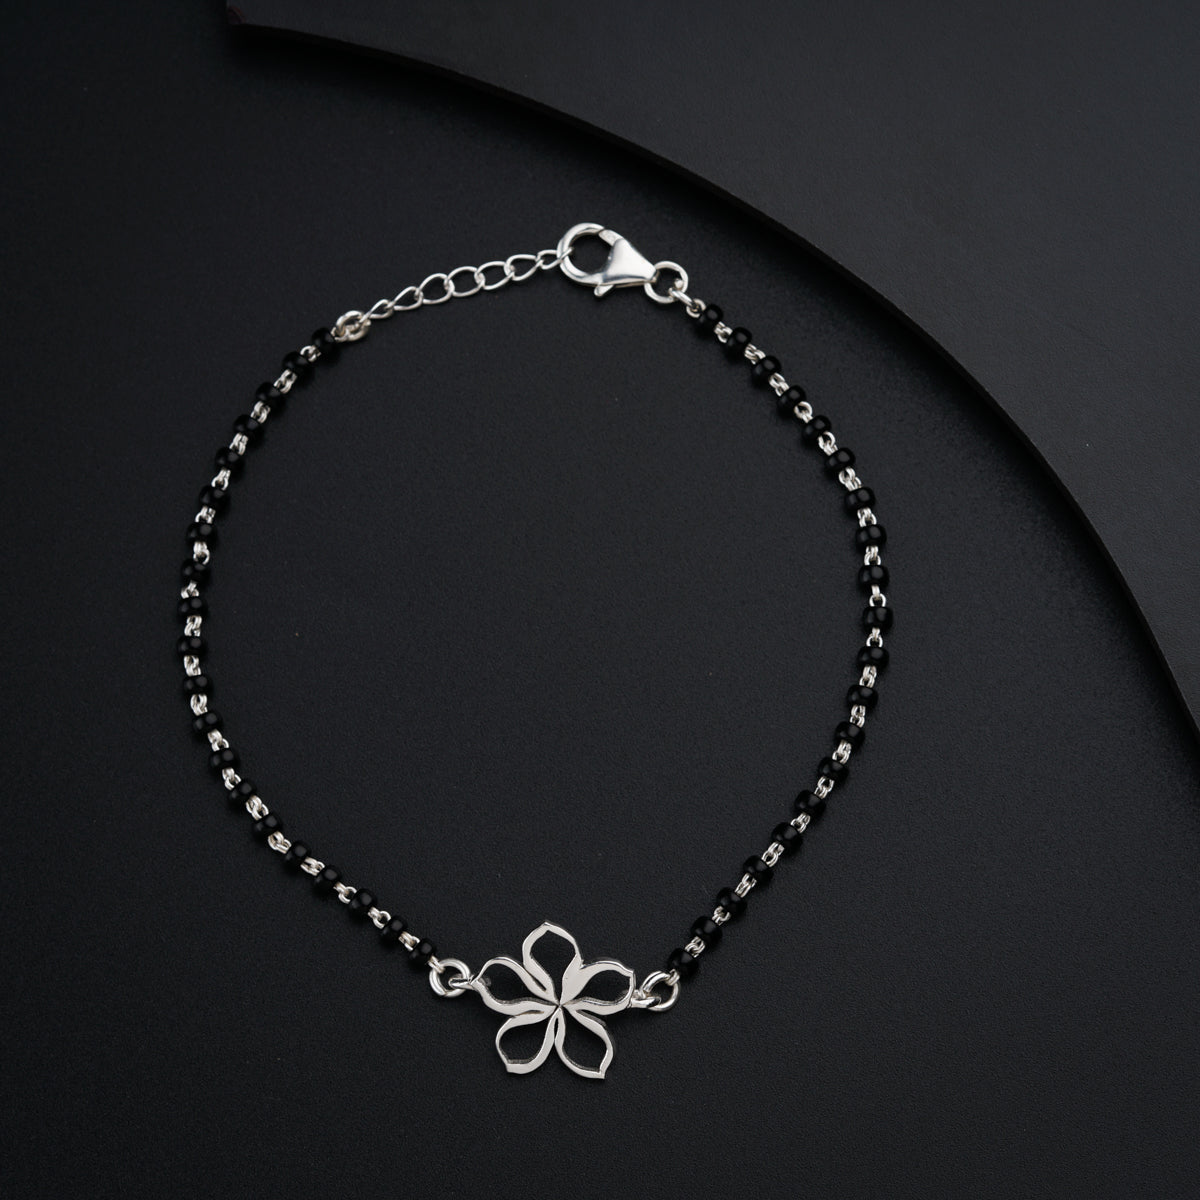 a black beaded bracelet with a silver flower charm